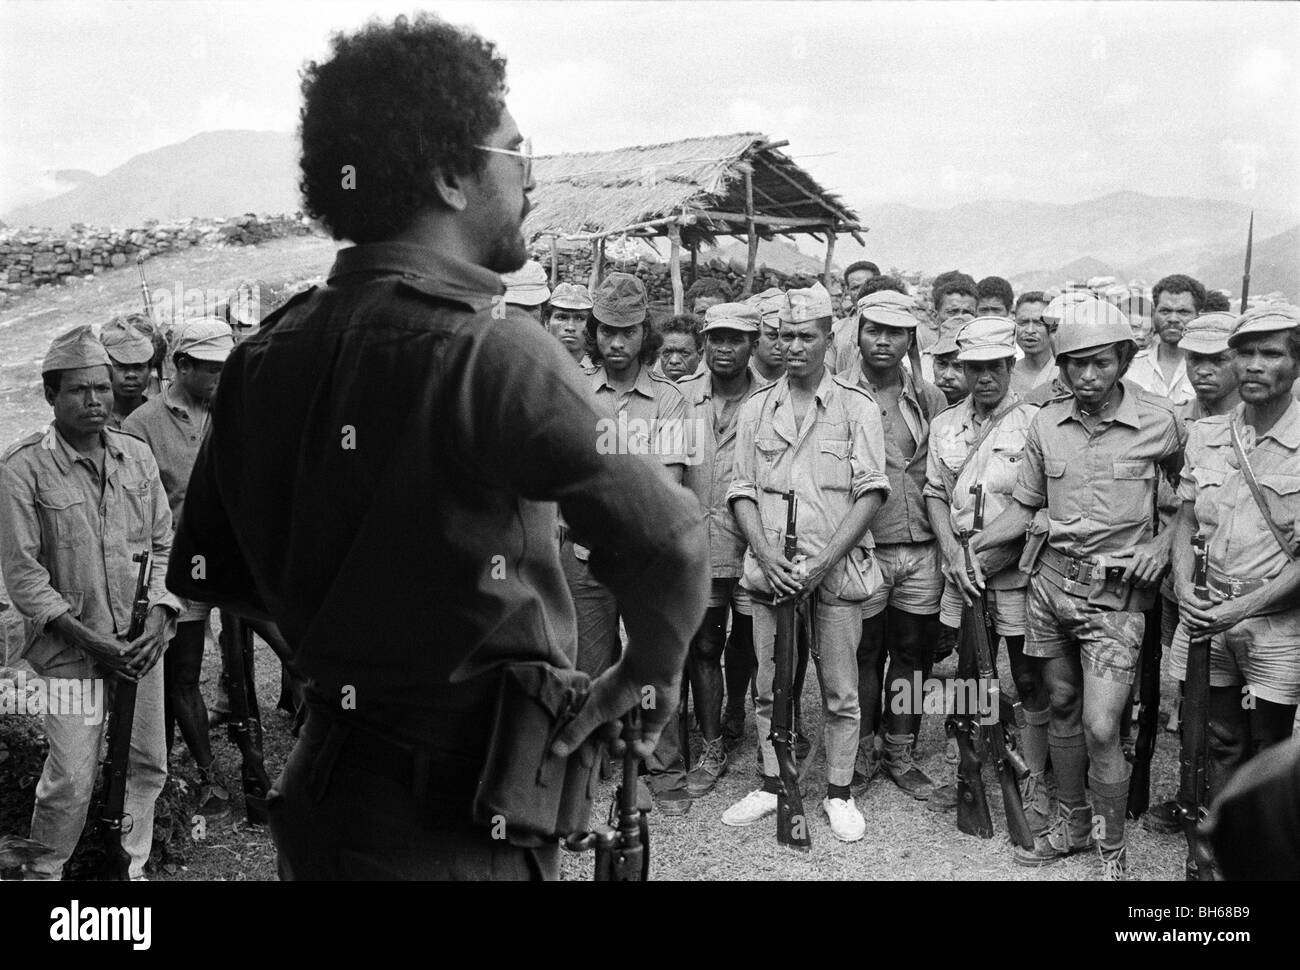 Jose Ramos-Horta addresses Fretilin freedom fighters in western mountain area of East Timor where Indonesia is invading Stock Photo